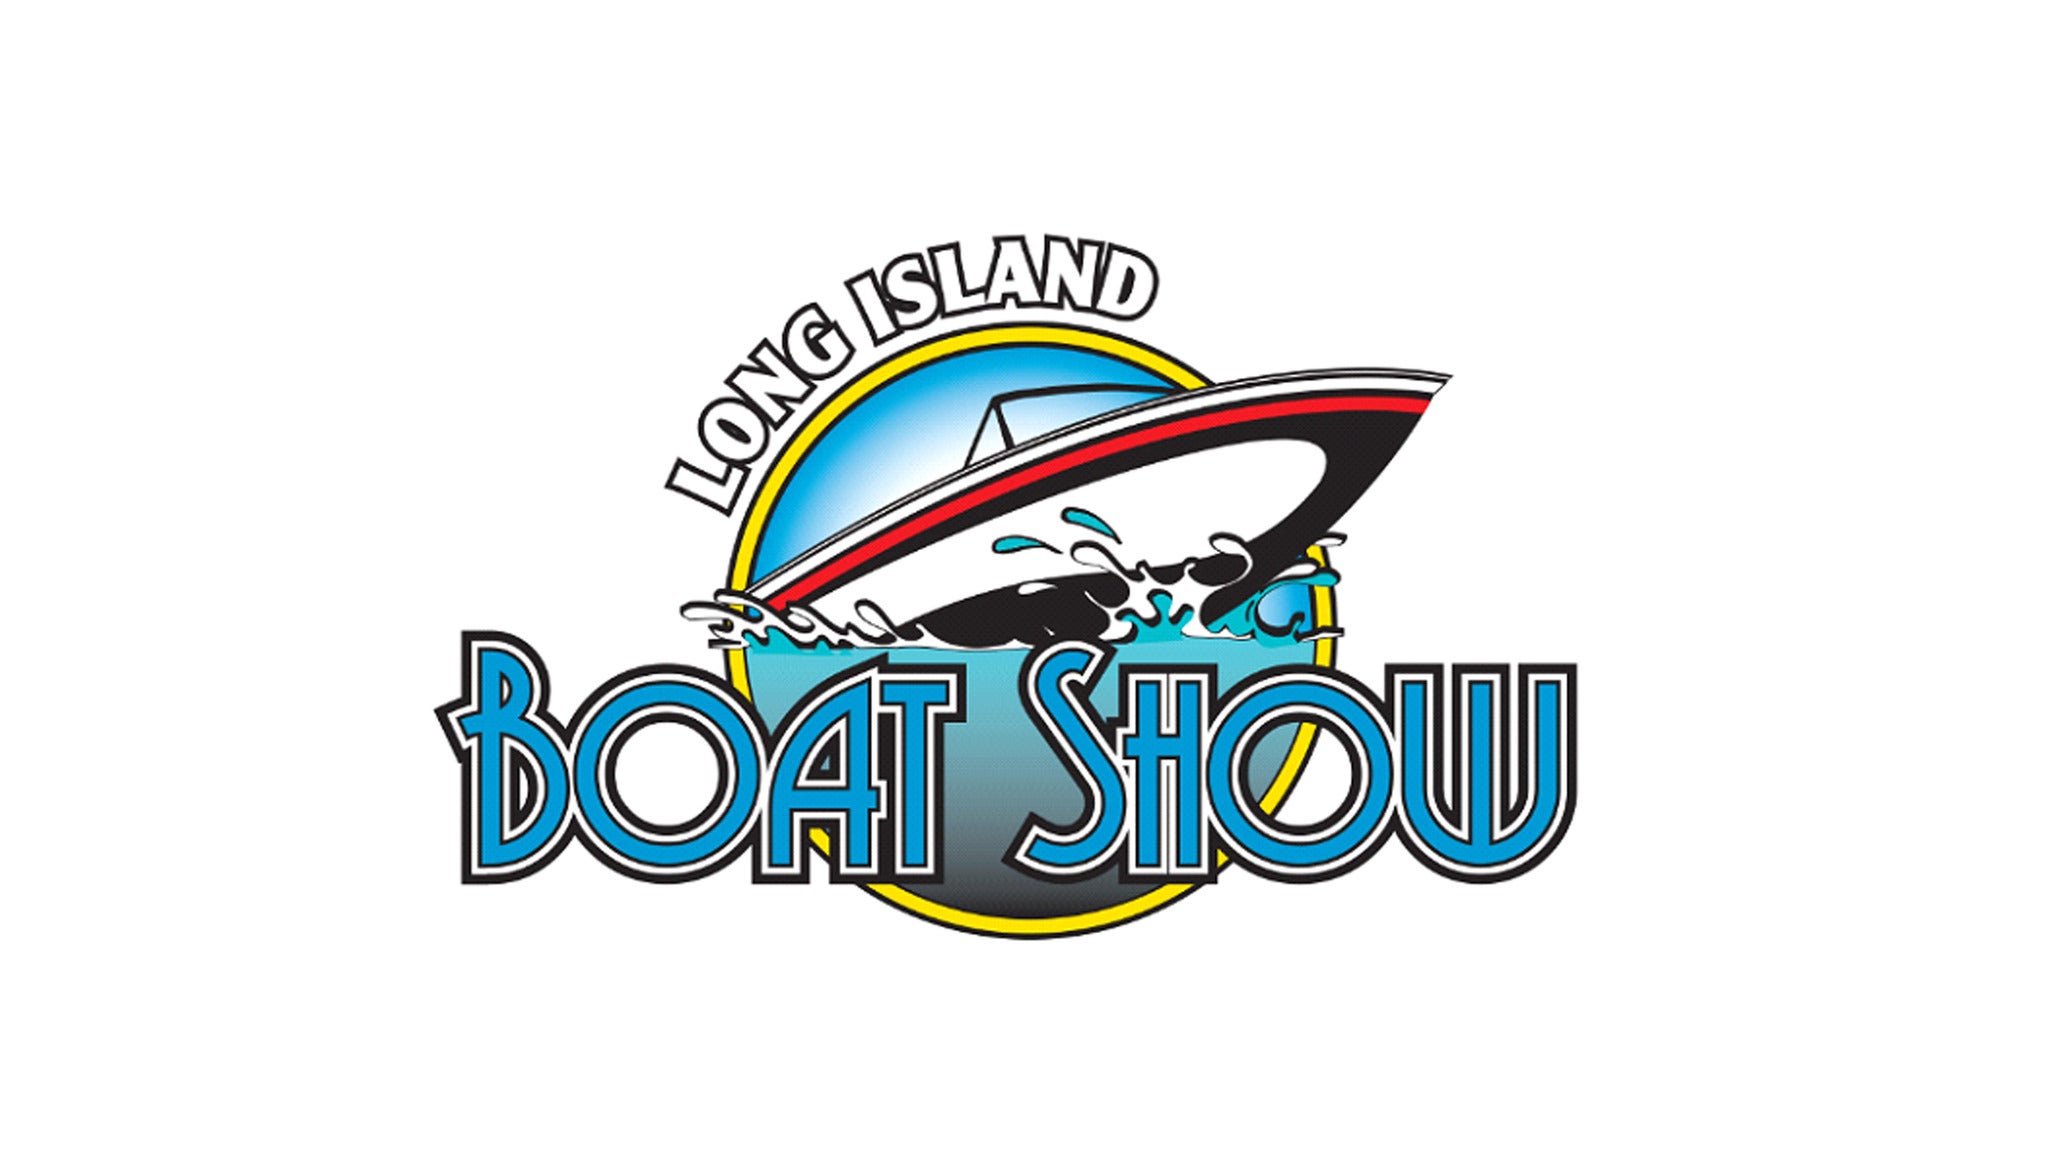 Long Island Boat Show Tickets Event Dates & Schedule